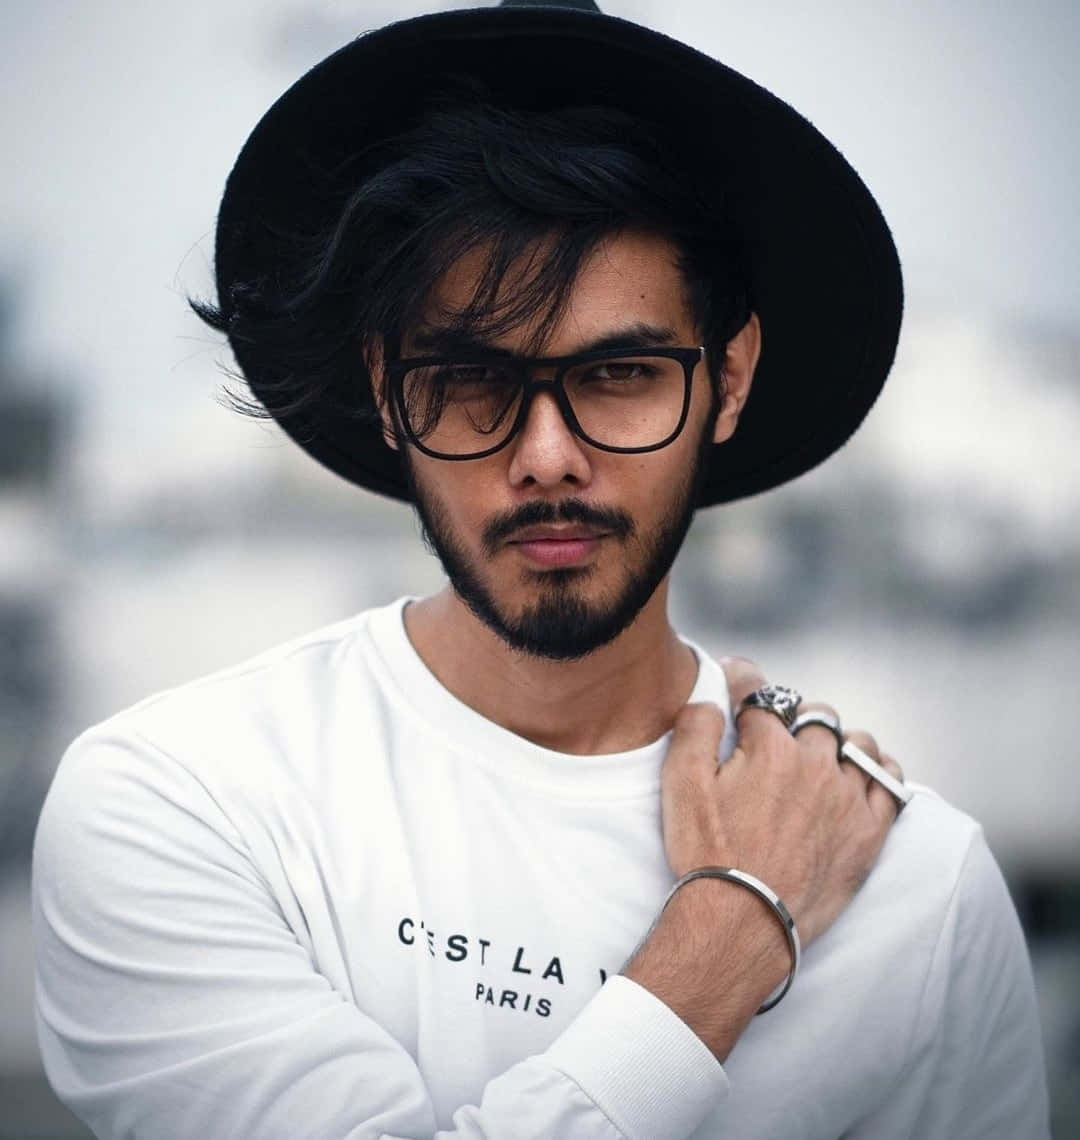 A Man In A Hat And Glasses Posing For A Photo